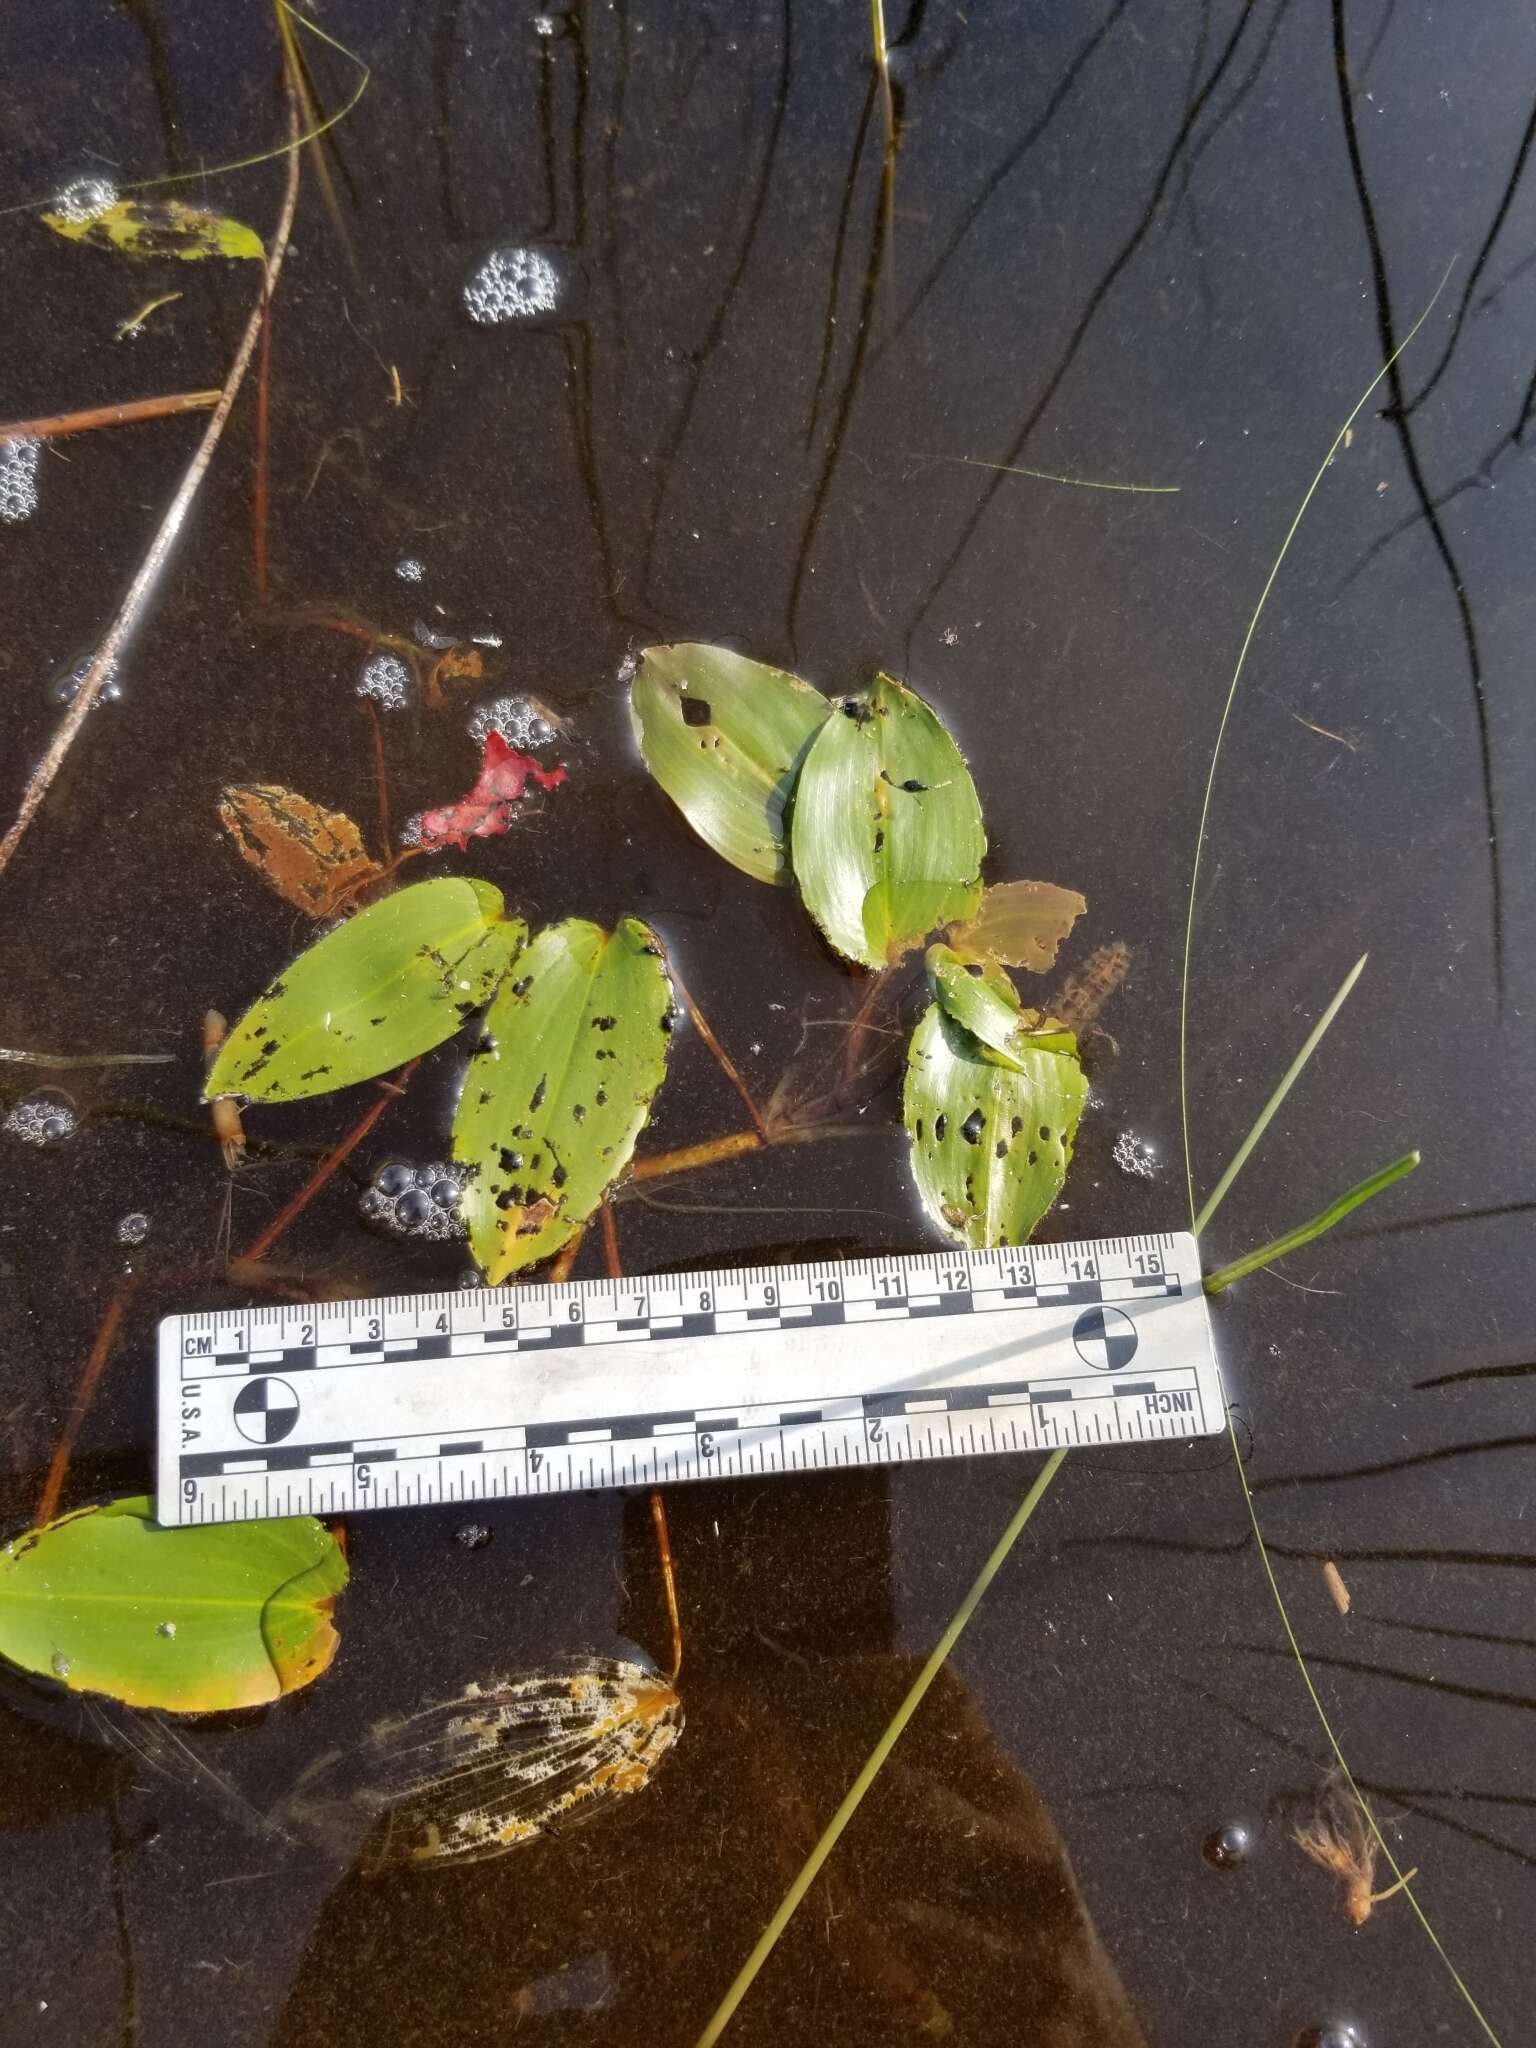 Image of Spotted Pondweed